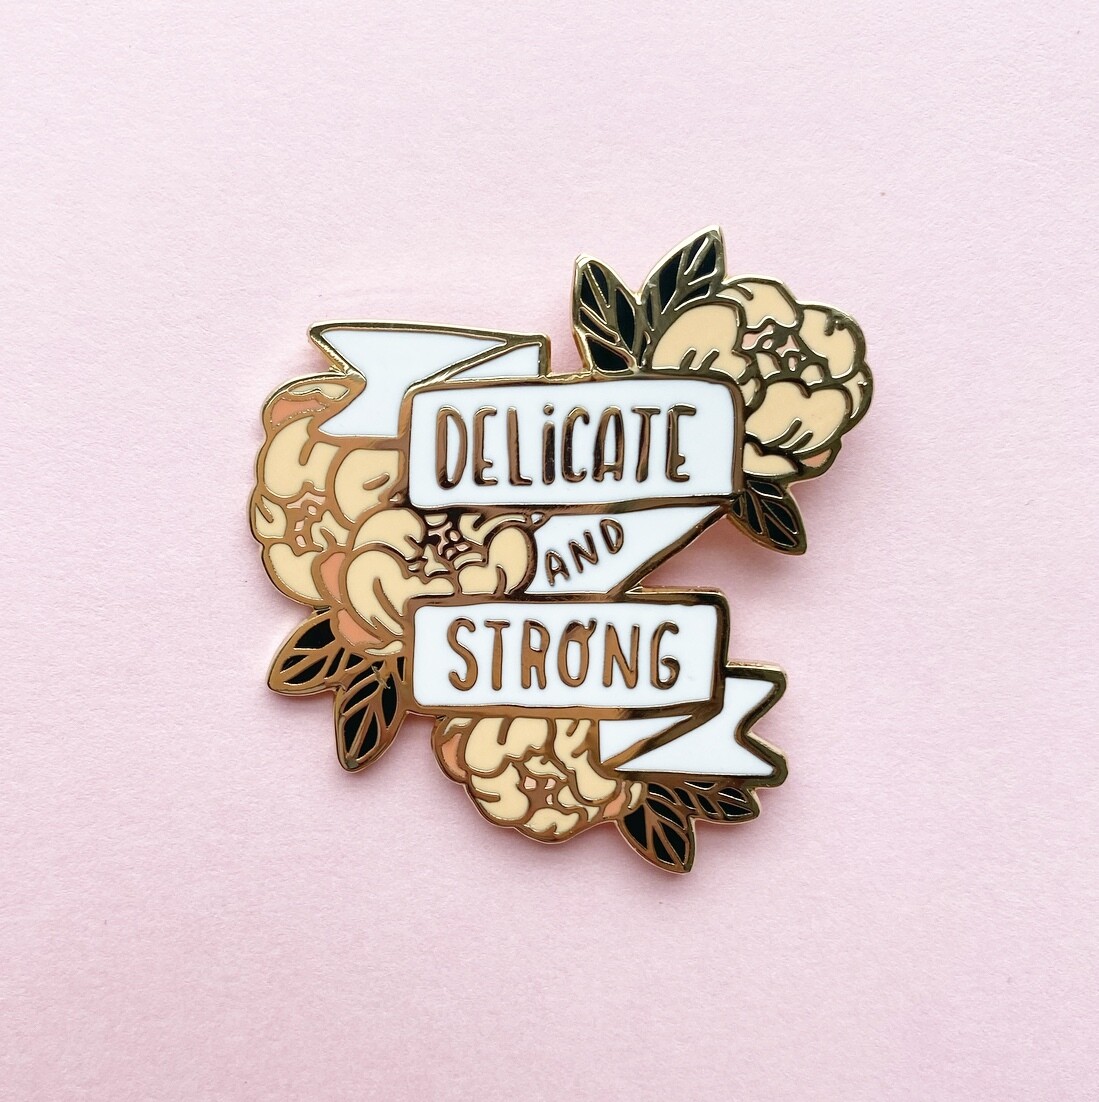 Delicate & Strong in gold pin